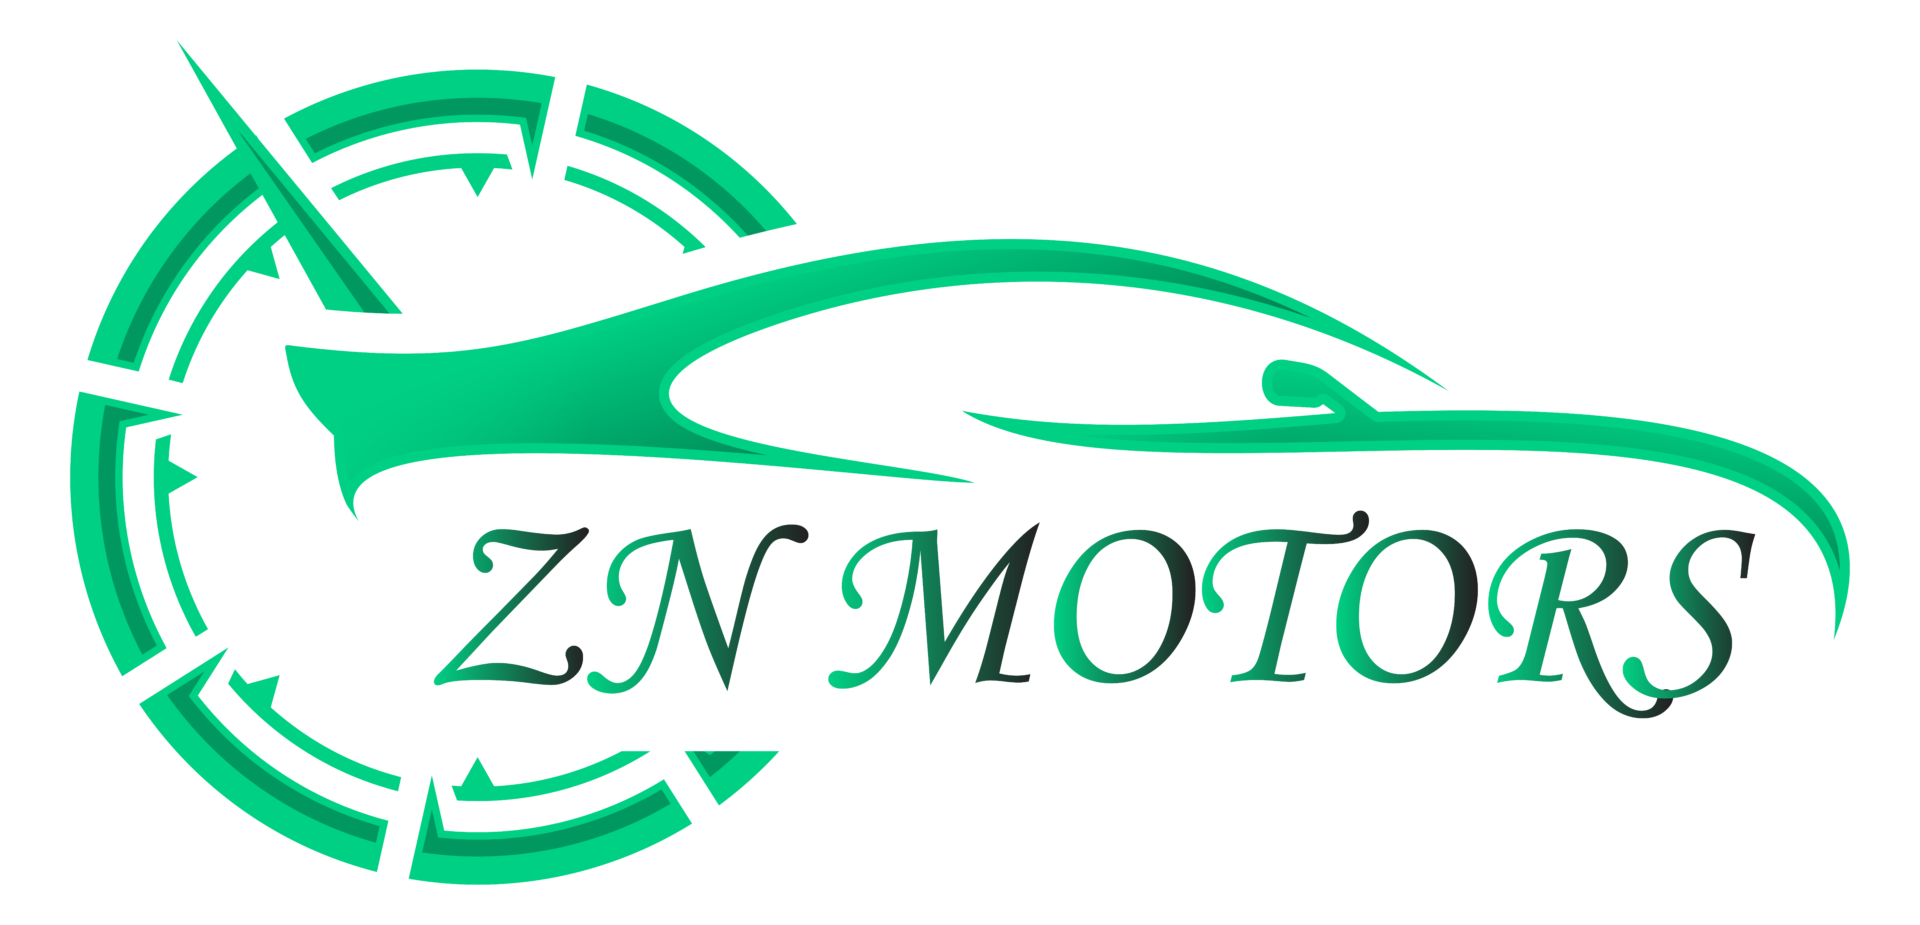 Logo of Zn Motors, providing auto motive prices and features information in Pakistan - Znmtors.